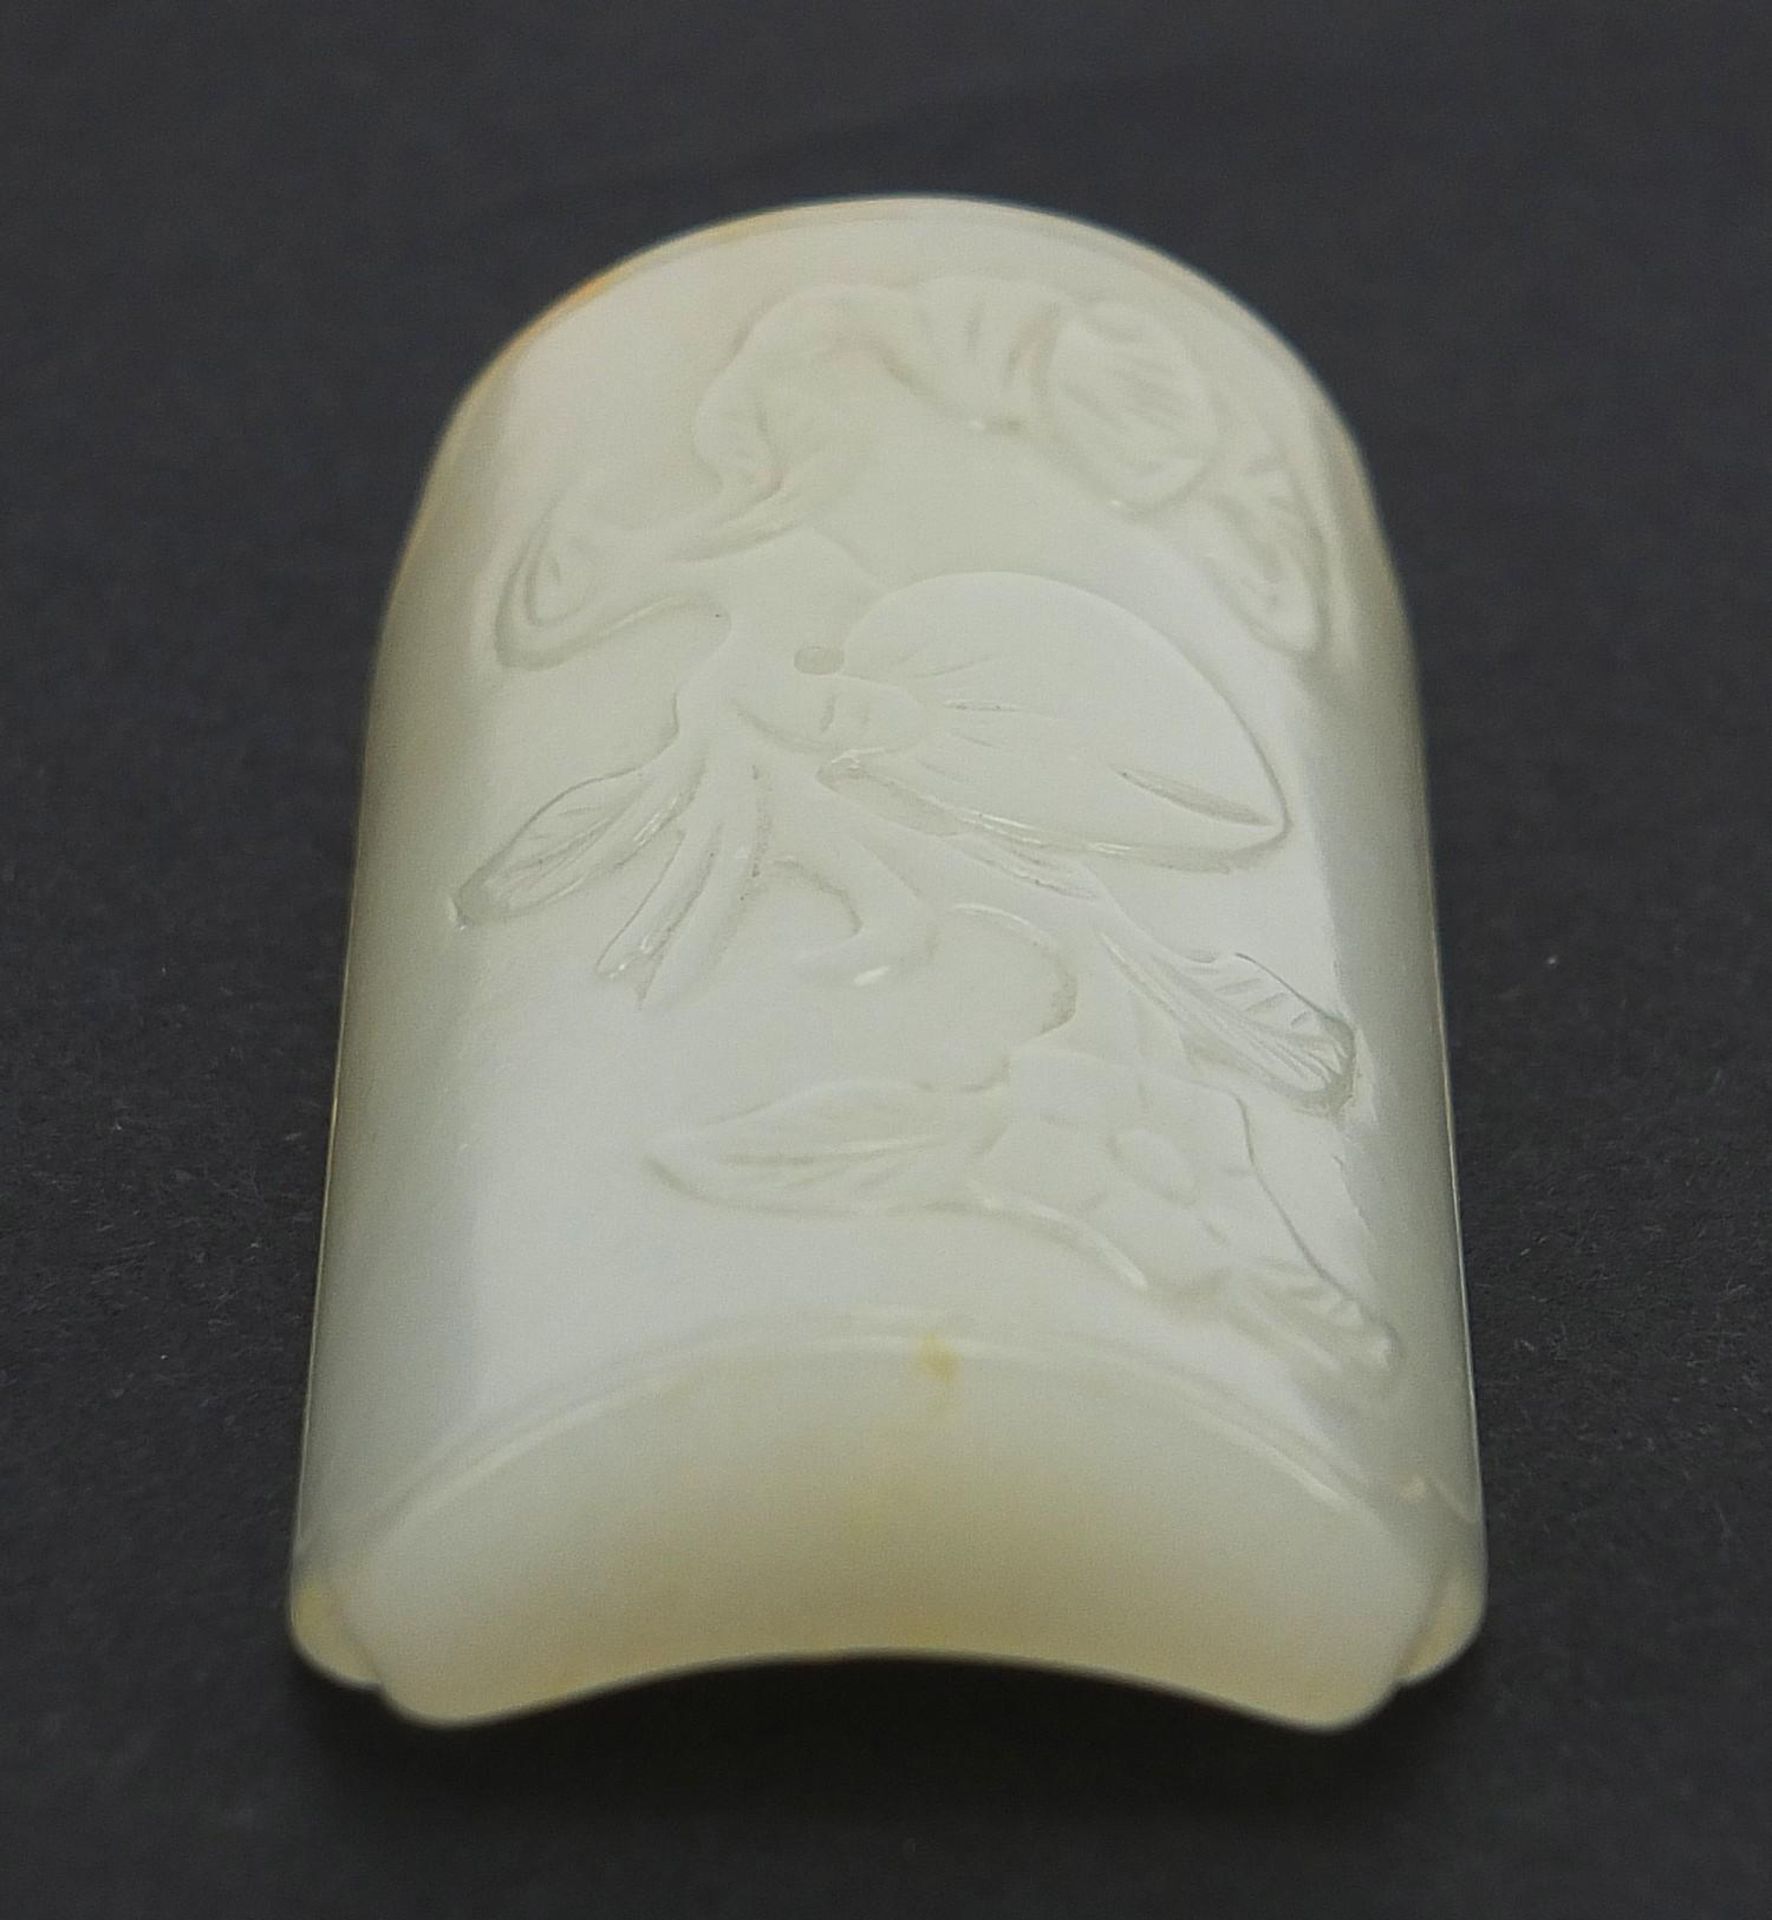 Chinese pale green jade scholar's wrist rest carved with a bat and peach, 6cm wide - Image 5 of 6